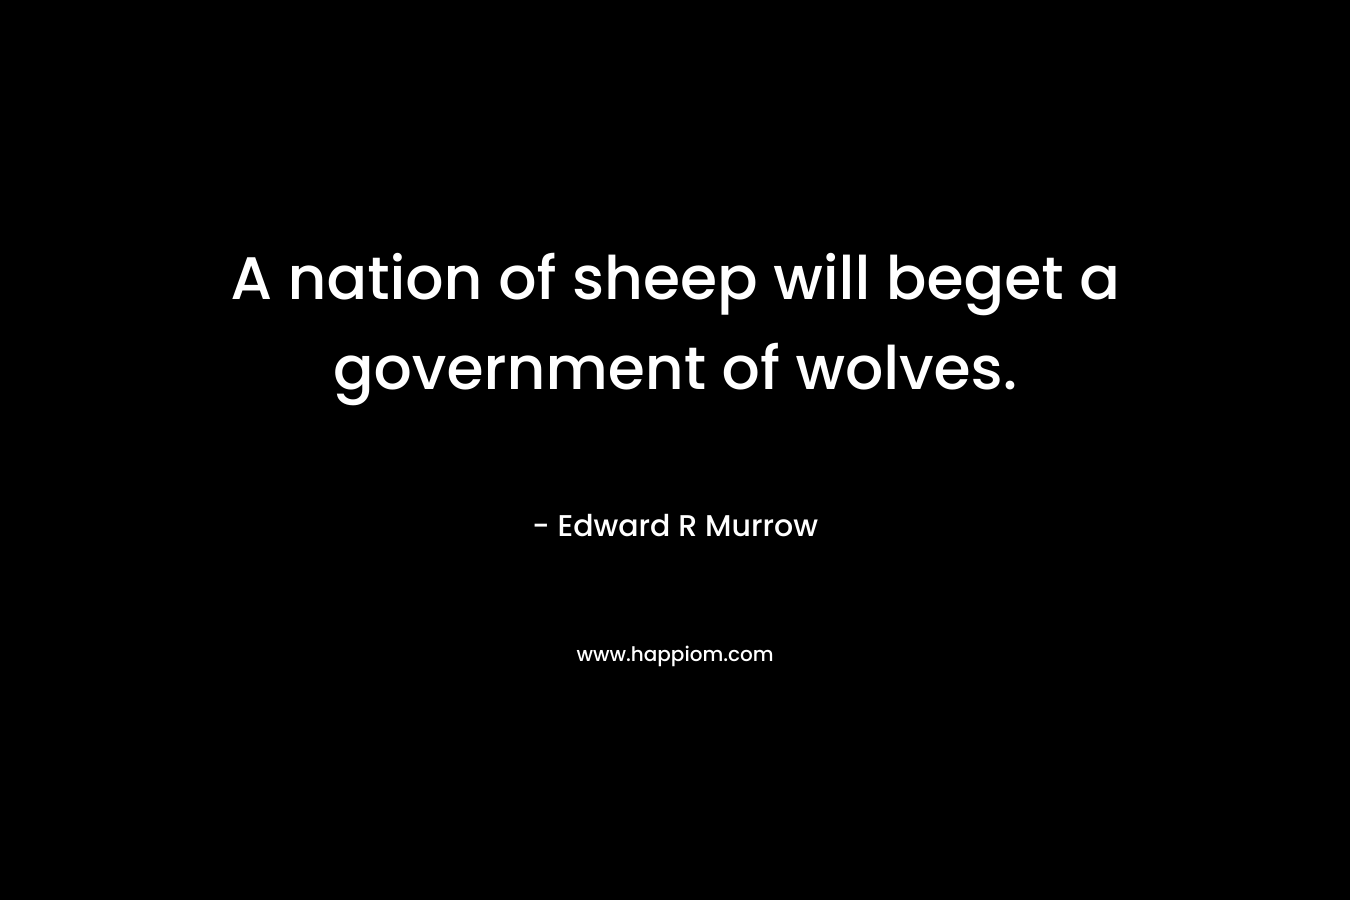 A nation of sheep will beget a government of wolves. – Edward R Murrow